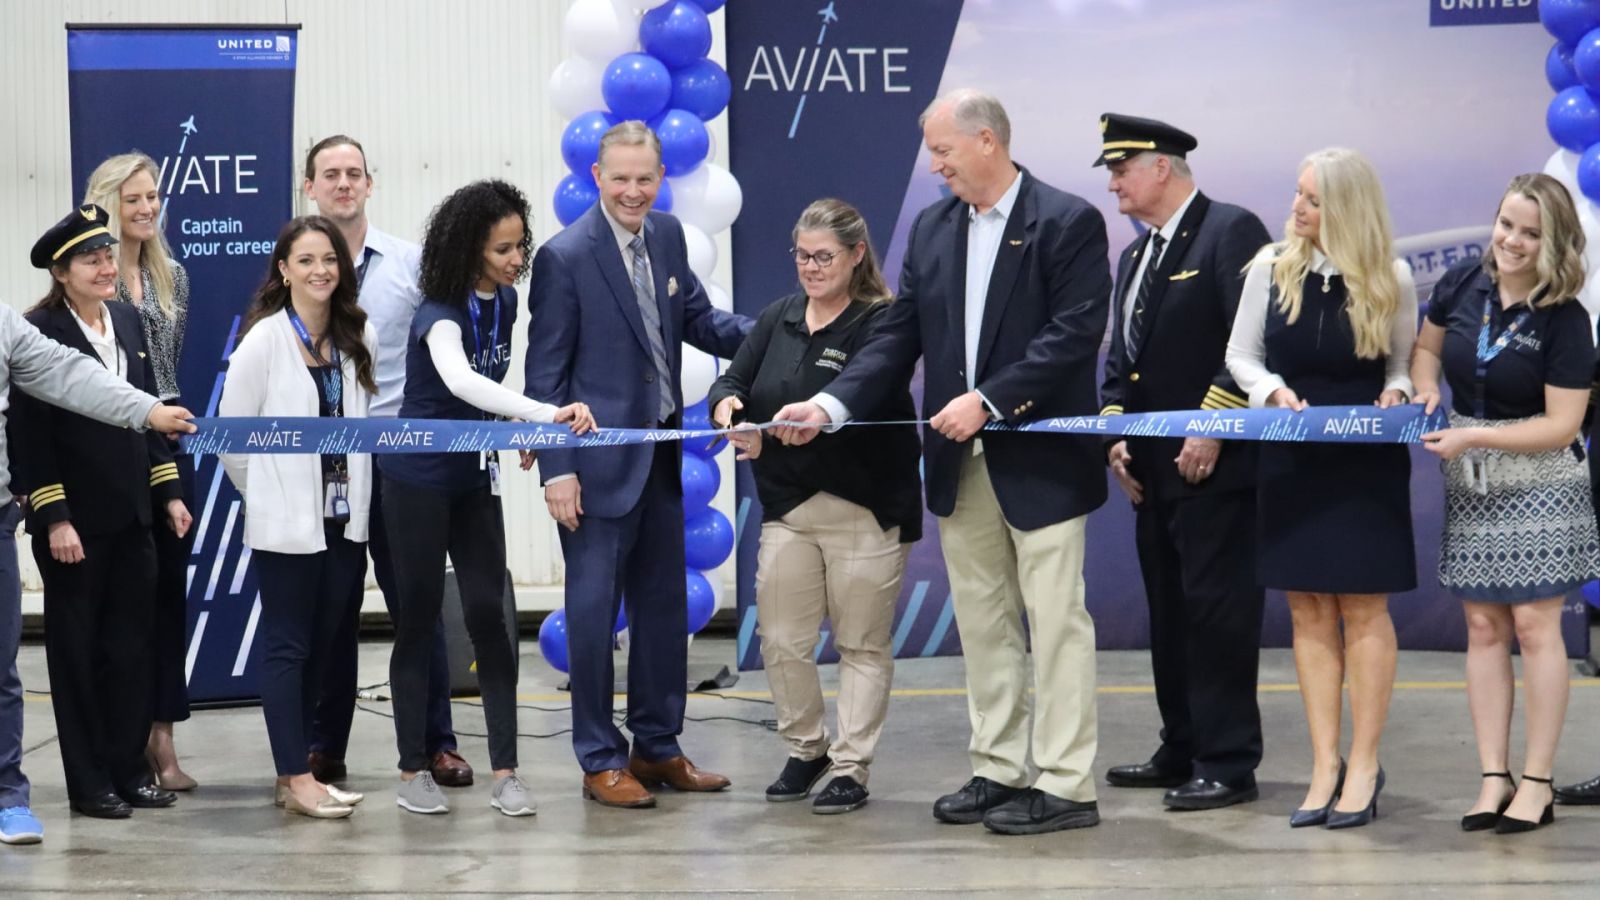 Purdue University Partners with United Airlines’ Aviate